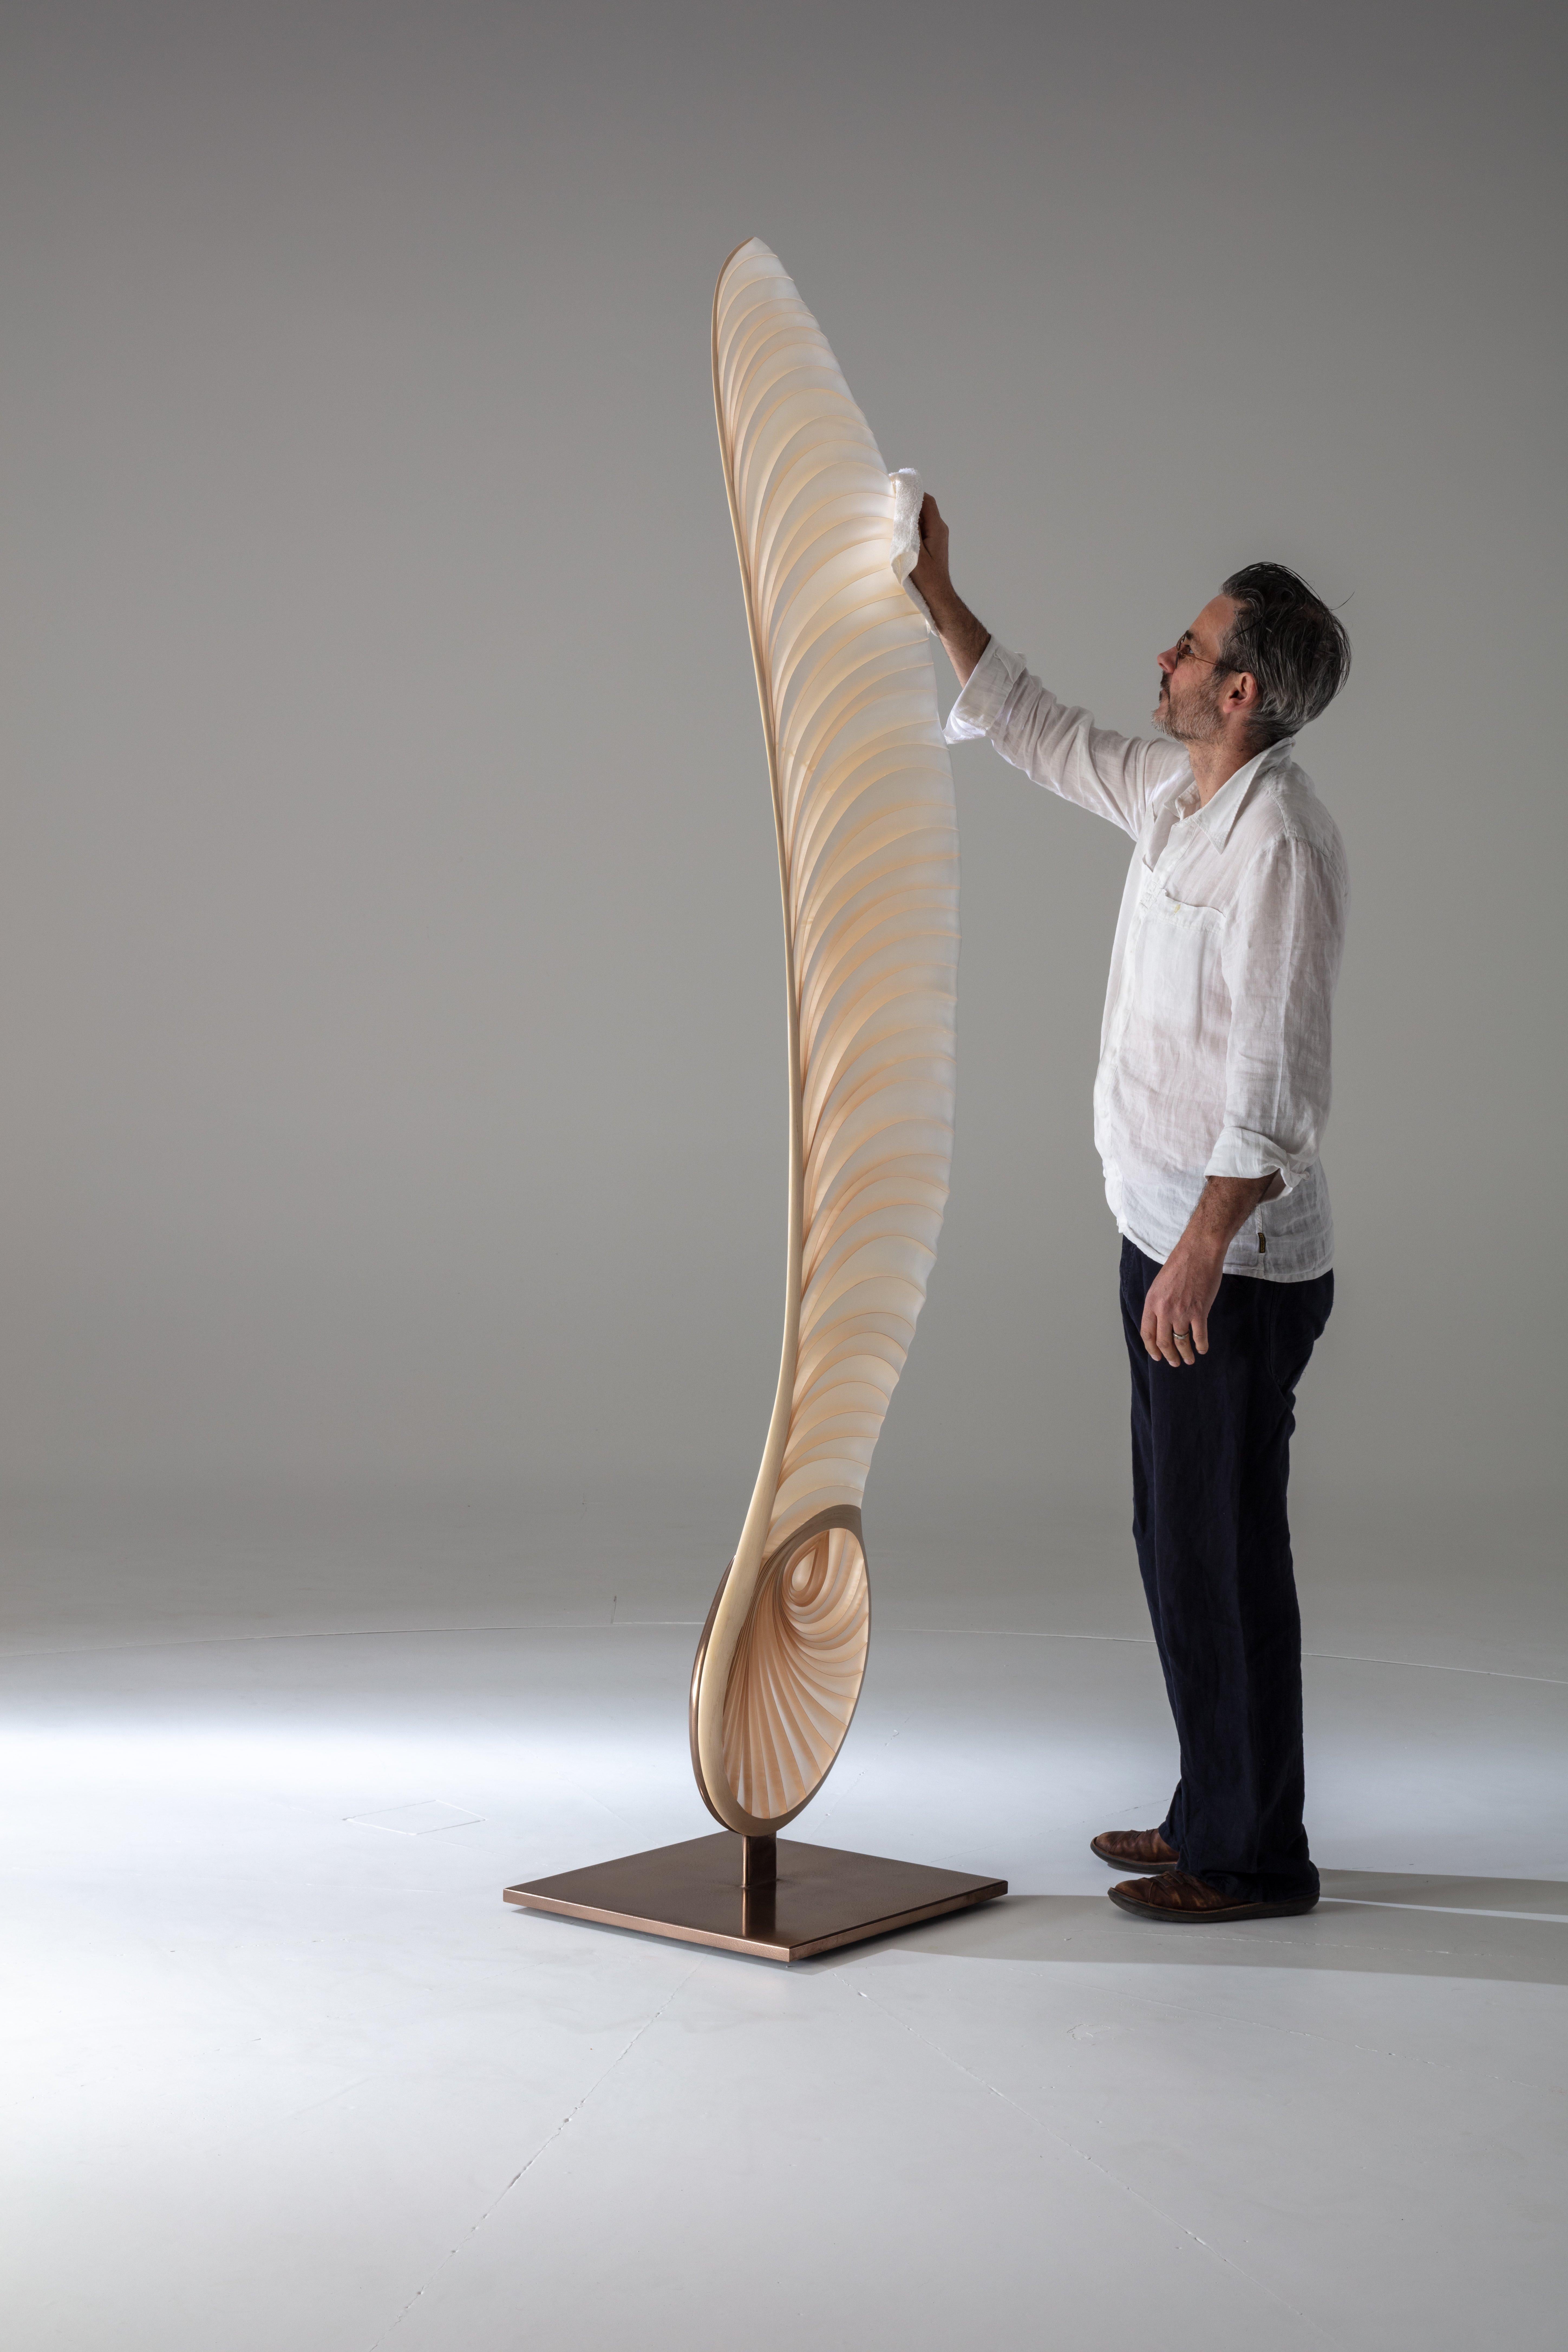 Ethereal Sycamore Seed Sculpture by International Artist Marc Fish. Made from sycamore and resin in a very organic sculptural form. Elegant and sinuous the sculpture shows grace and warmth whilst evoking nostalgia. The Ethereal Sycamore Seed